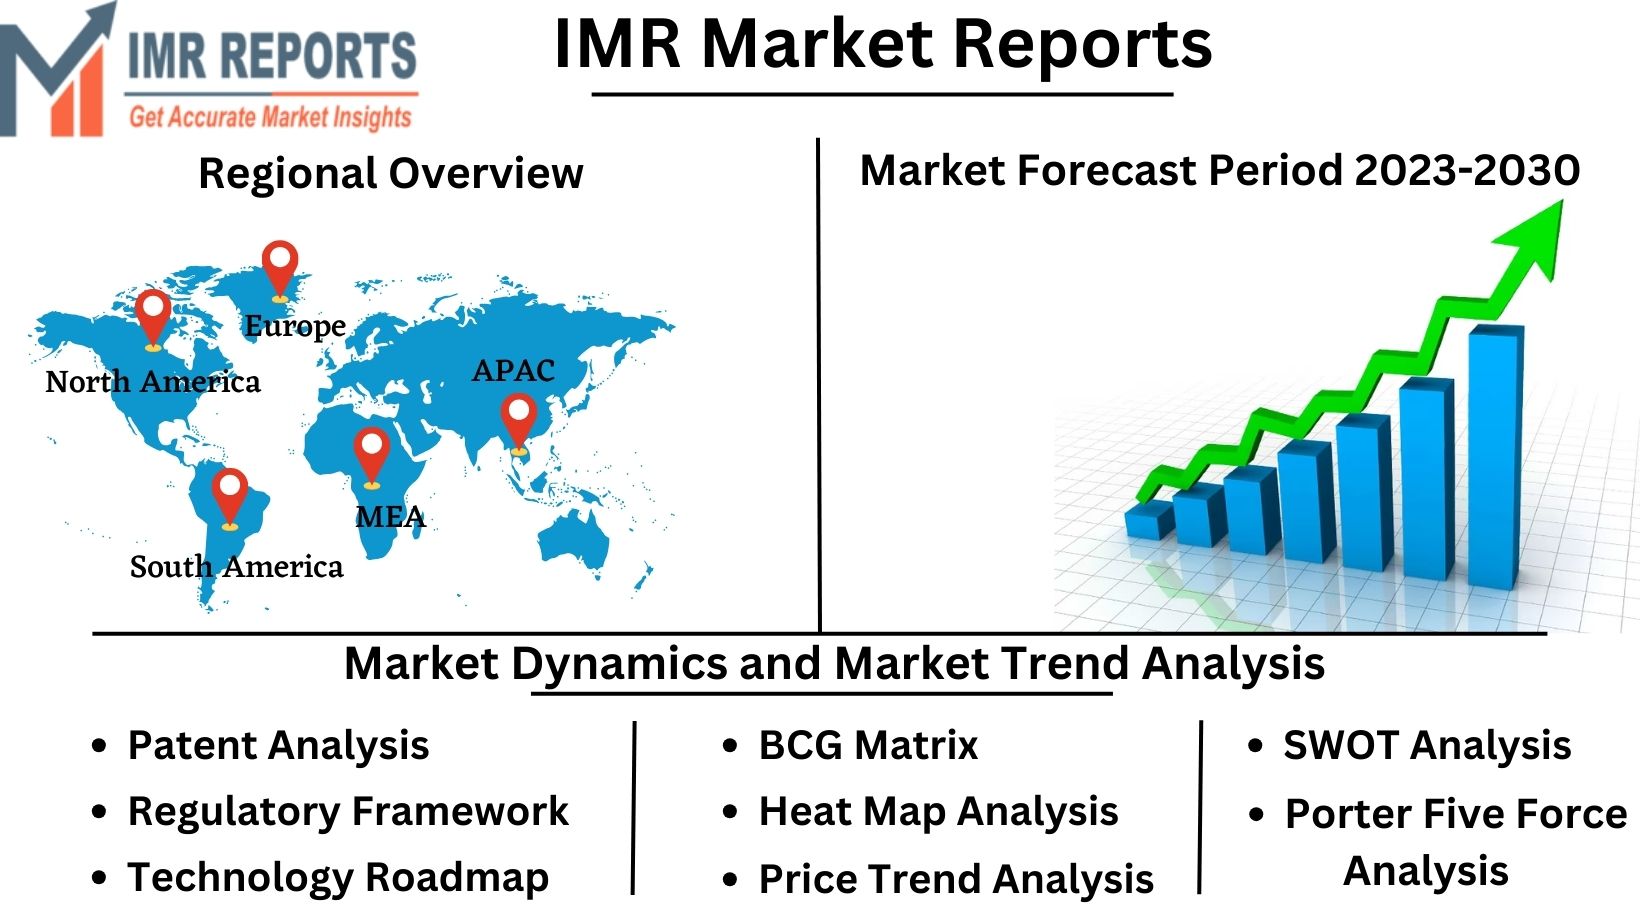 IMR_Market_Reports_(1)82